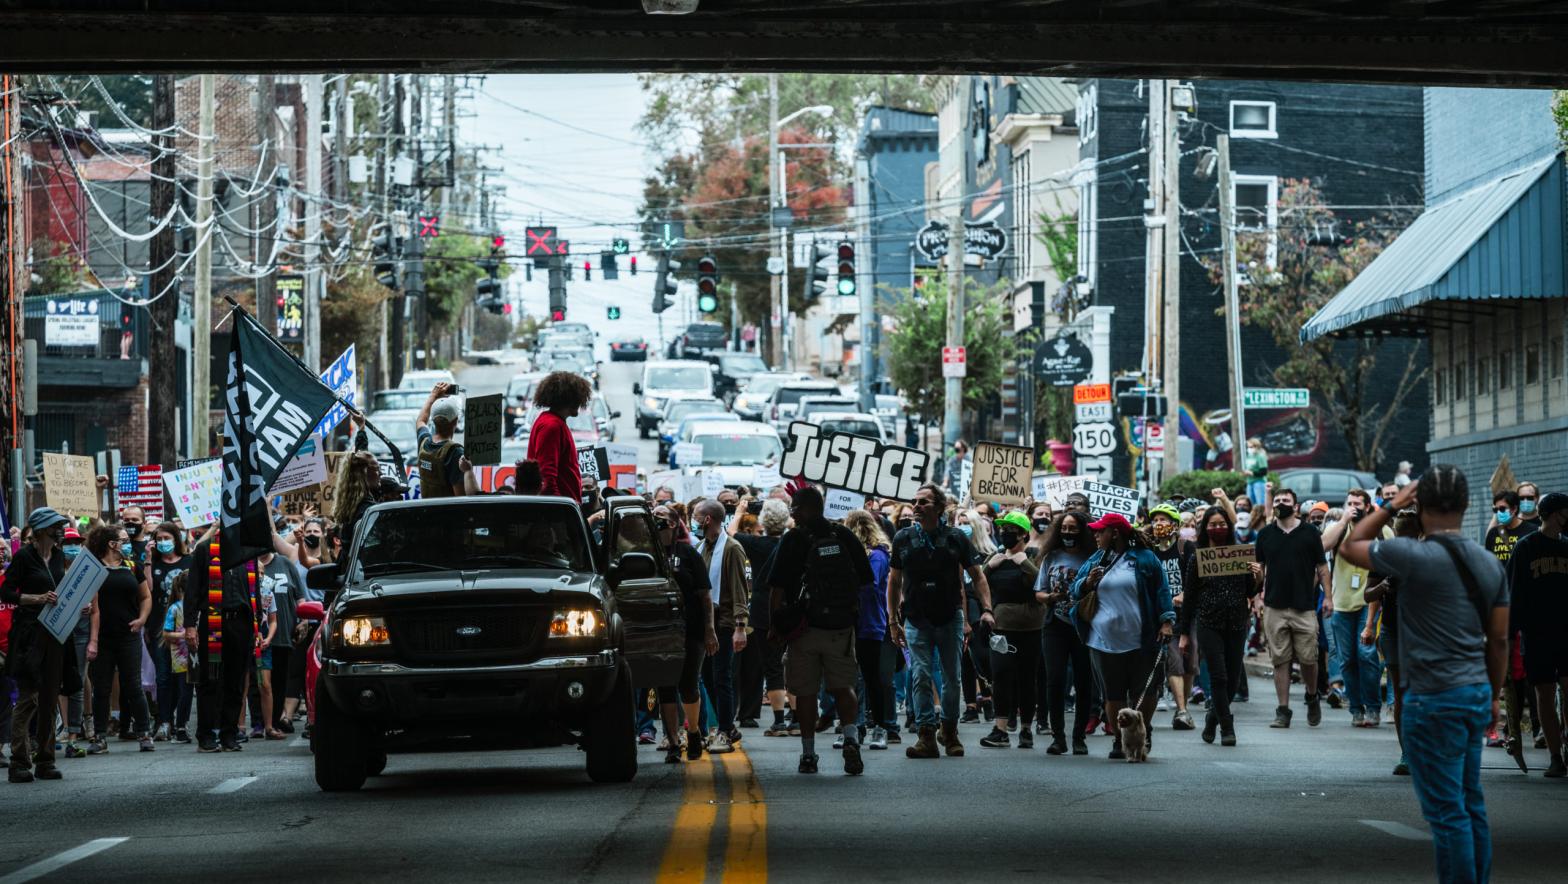 A group of protesters gathers in the street in a march to the Breonna Taylor memorial at Jefferson Square Park on October 10, 2020 in Louisville, Kentucky.  (Photo: Jon Cherry, Getty Images)